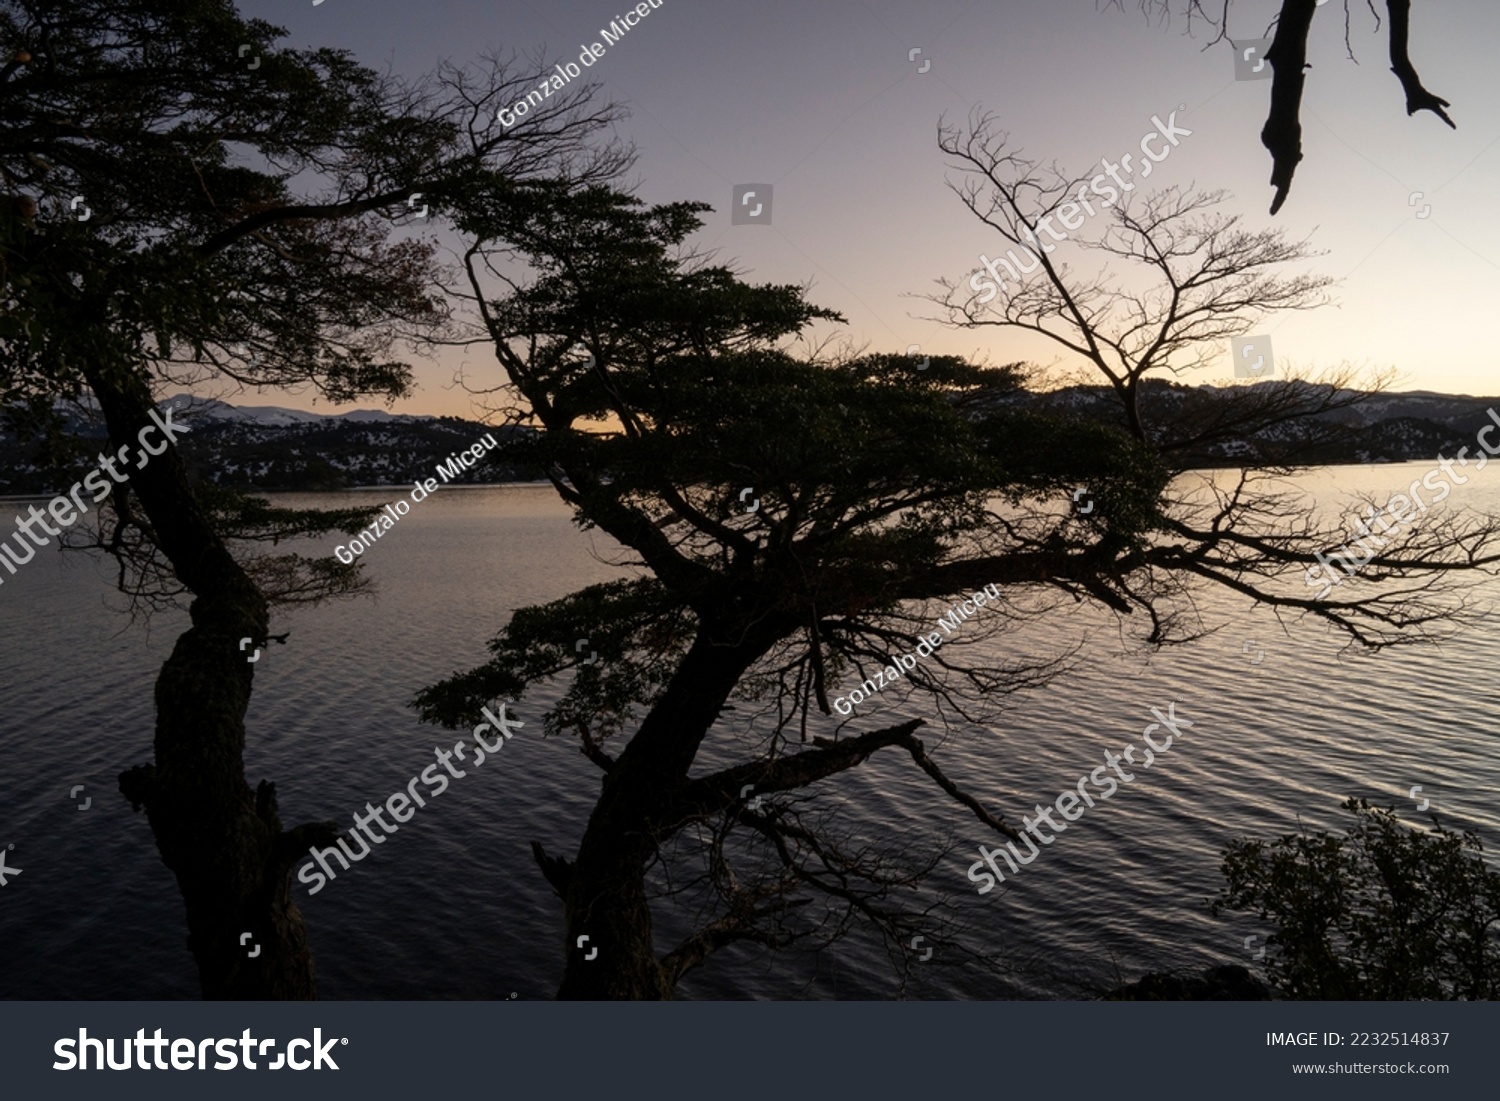 Magical view of the dark silhouette of the forest trees, calm lake and mountains, under a nightfall sky.  #2232514837